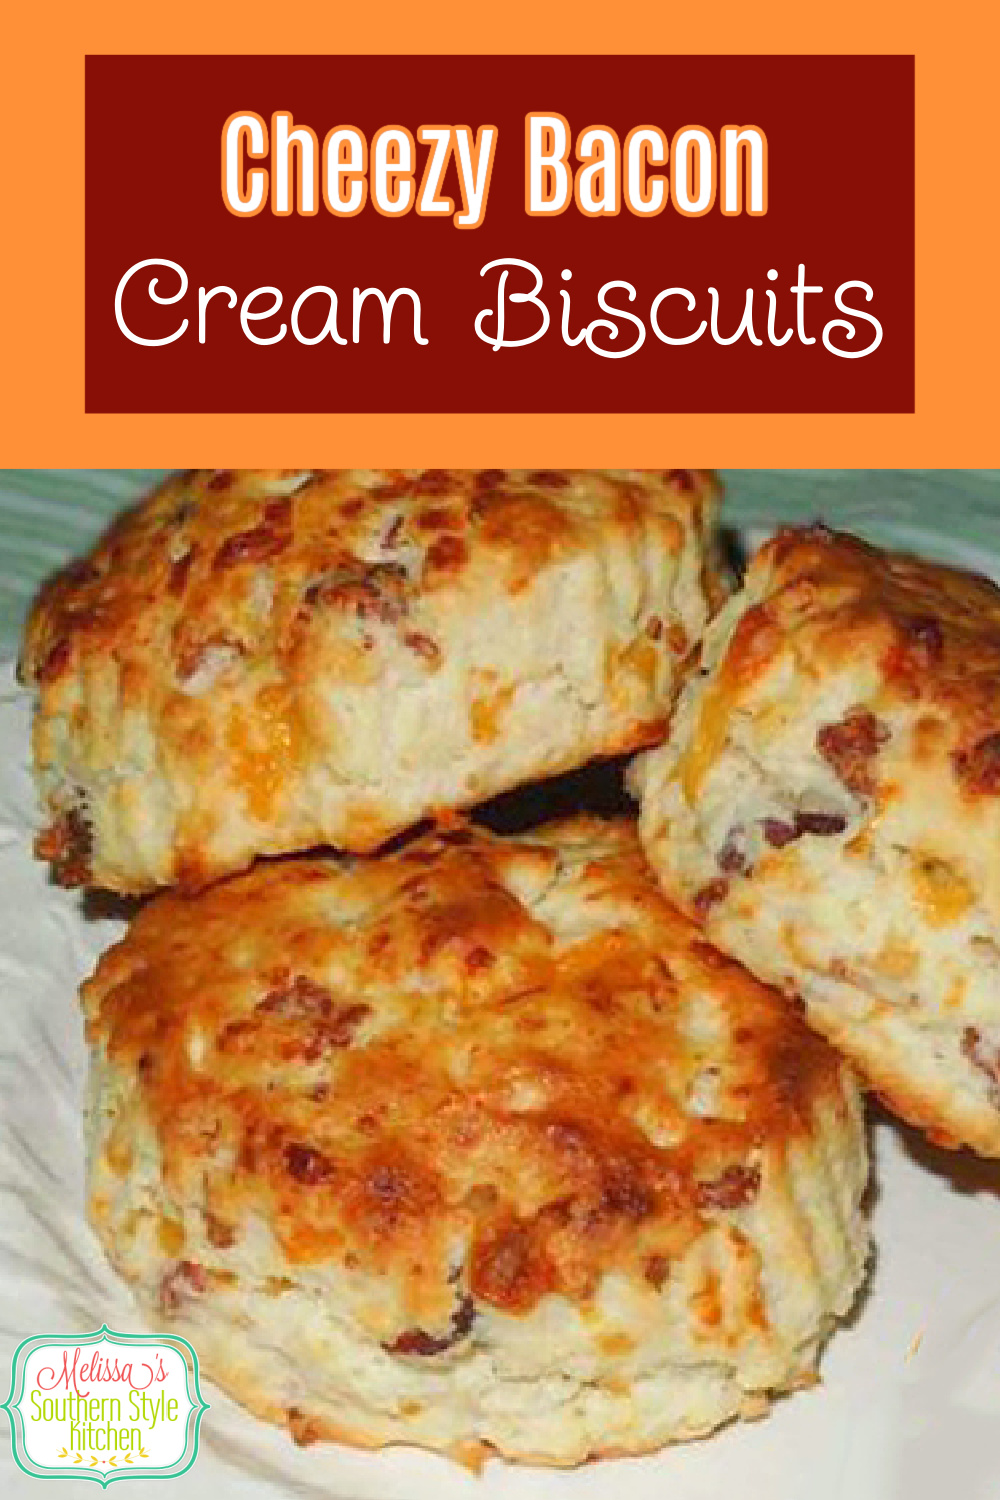 Cheezy Bacon Cream Biscuits are a tasty start to any day #biscuits #bacon #easybiscuitrecipes #brunch #breakfast #southernbiscuits #southernfood #southernrecipes #melissassouthernstylekitchen